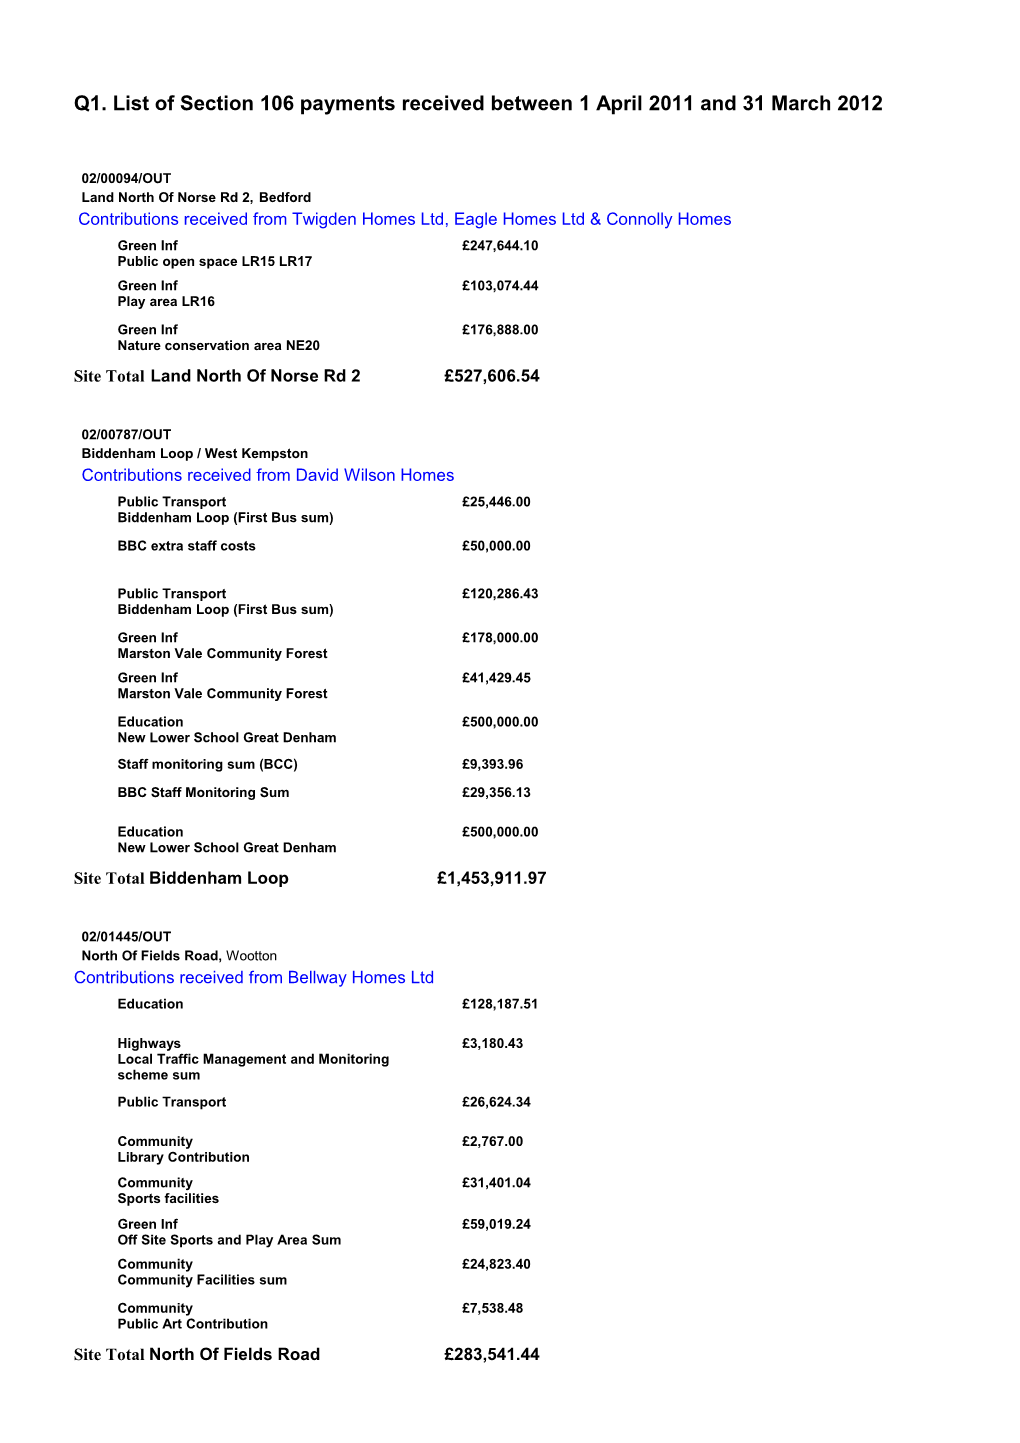 Q1. List of Section 106 Payments Received Between 1 April 2011 and 31 March 2012